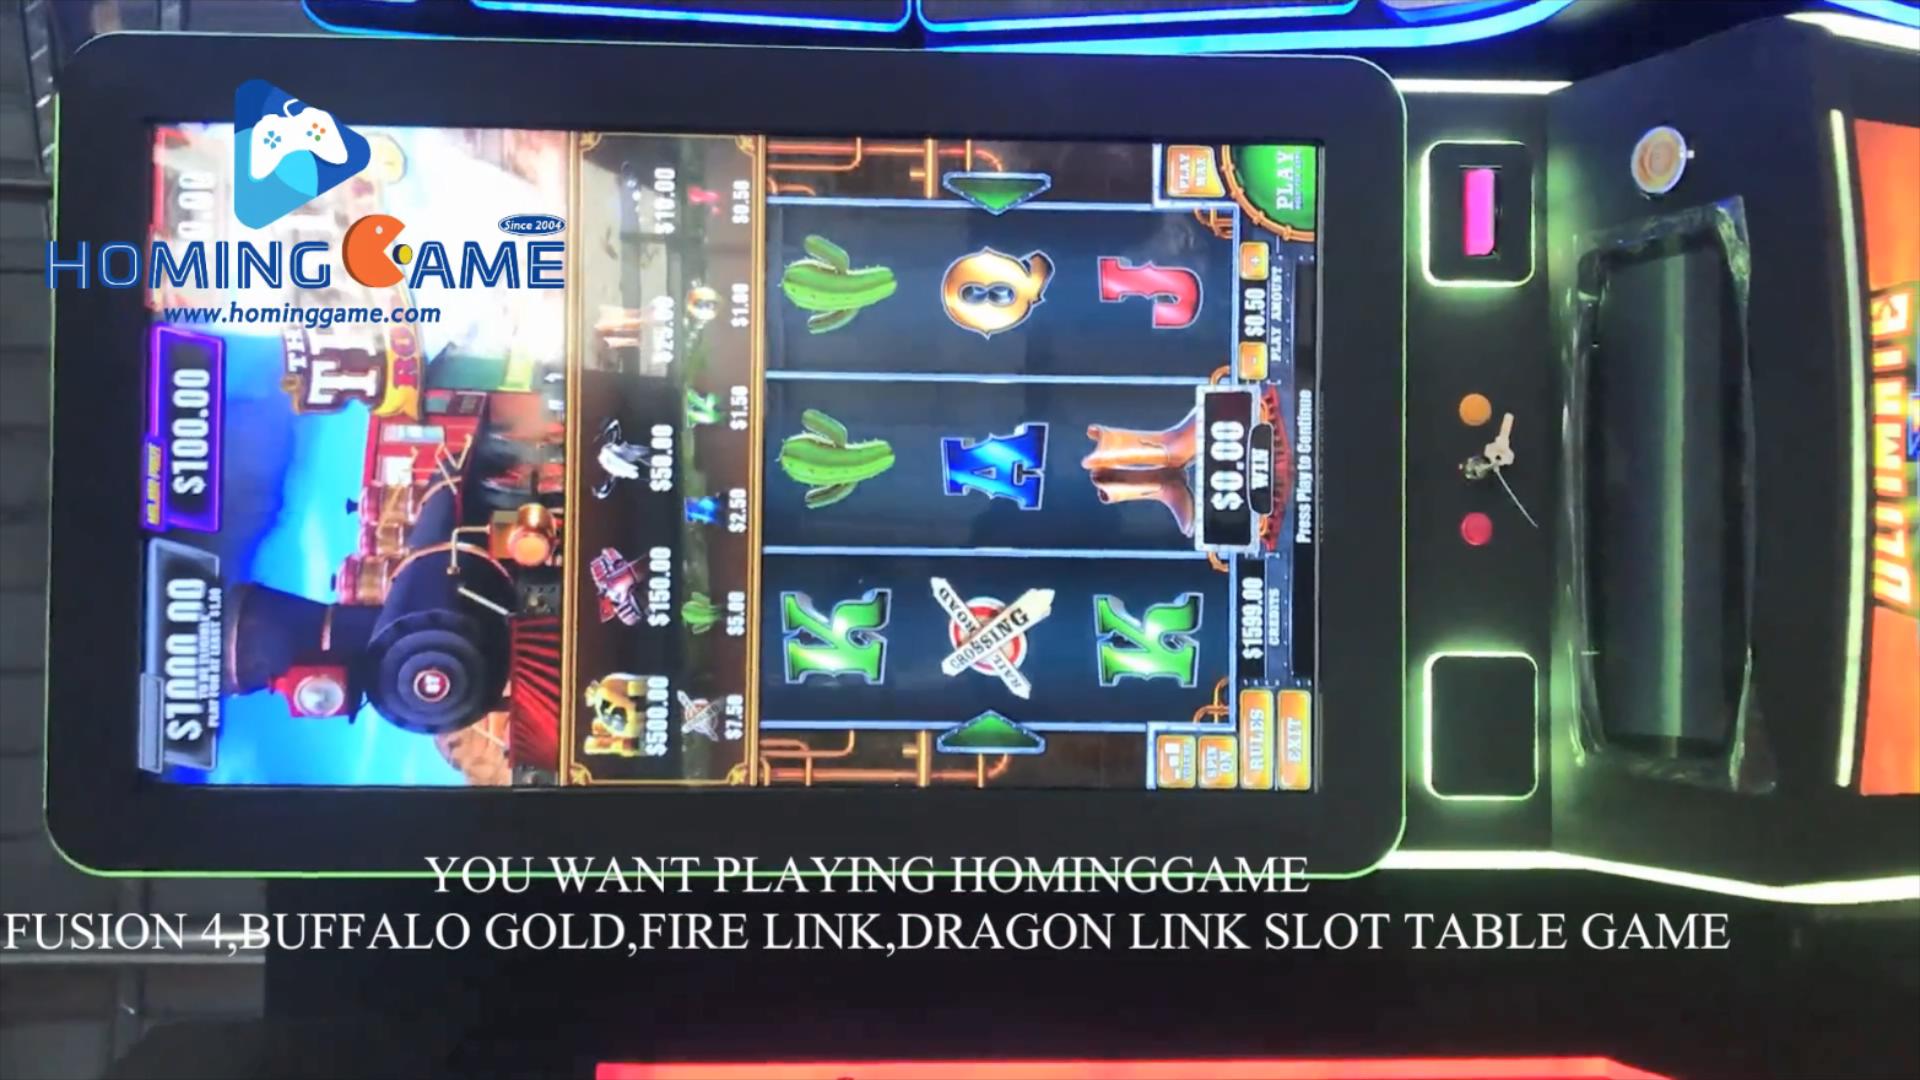 Do you want playing HomingGame Fusion 4,Buffalo Gold,Fire Link,Dragon Link,Panda link ,golden master,high roller,lighting etc slot table game machine(Order Call whatsapp:+8618688409495),8 in 1 fire link slot game machine,slot table game machine,,8 in 1 43